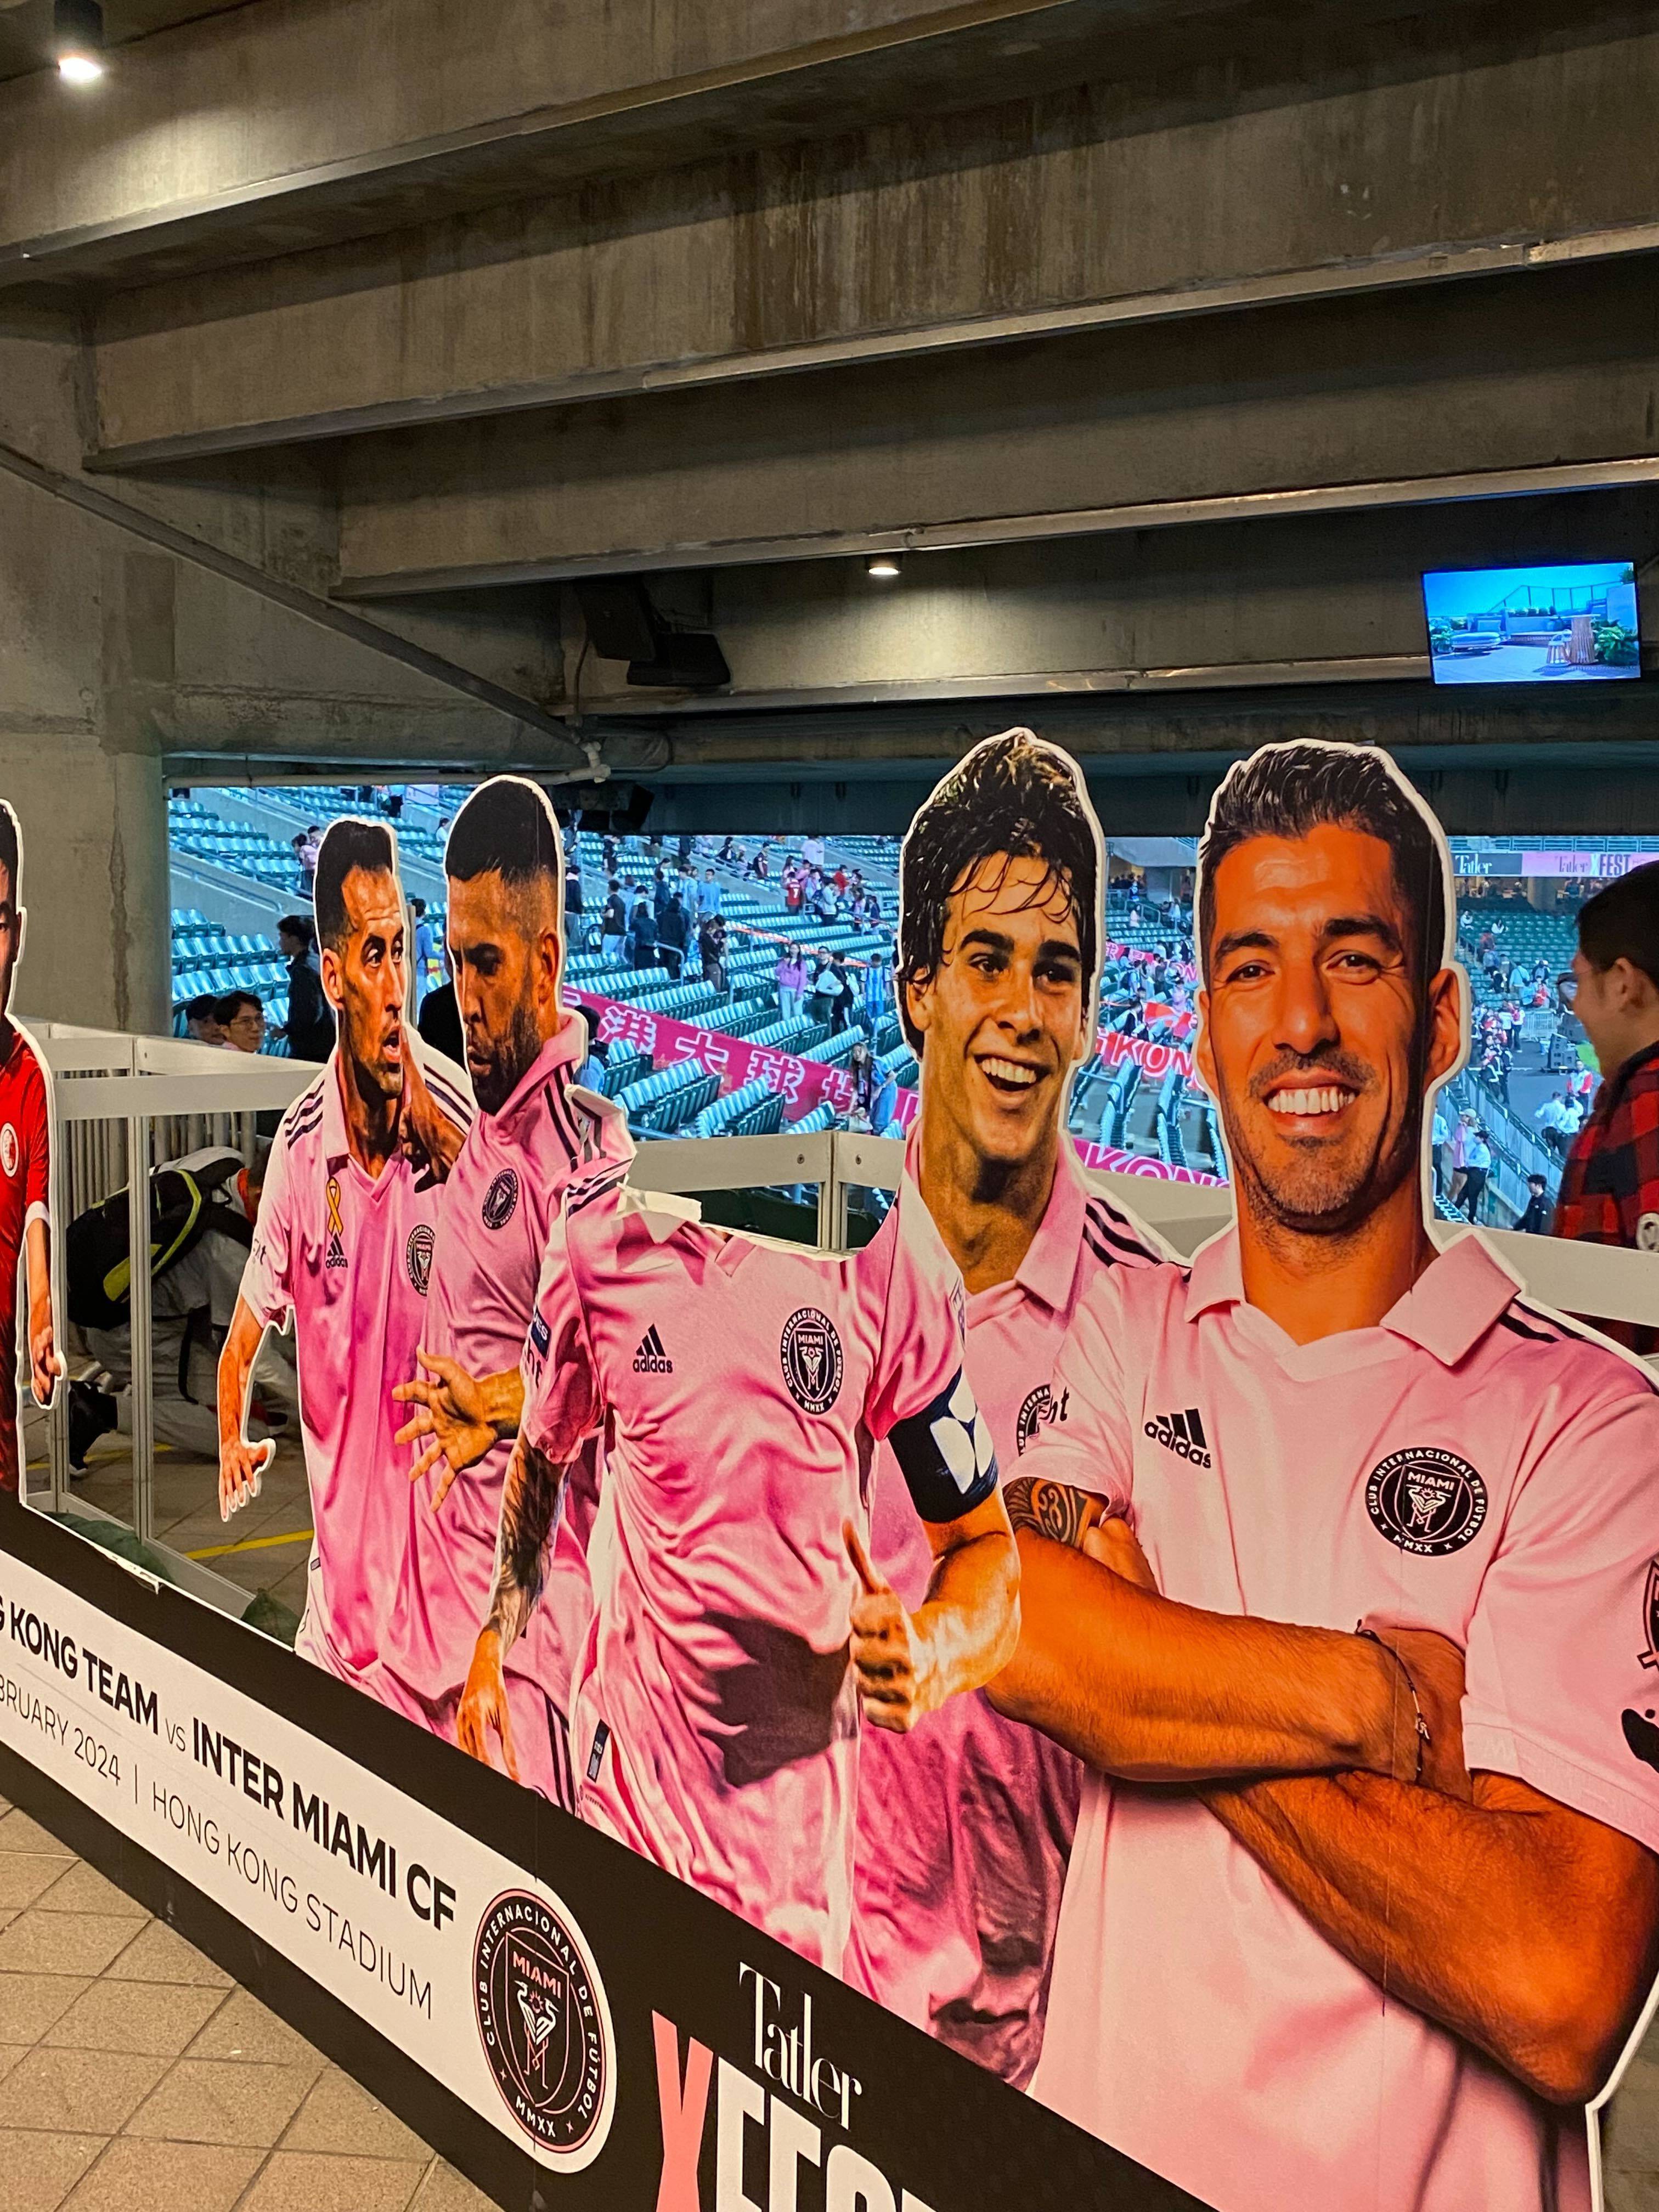 Lionel Messi’s head was torn off an advertising display at Hong Kong Stadium. Photo: Ezra Cheung